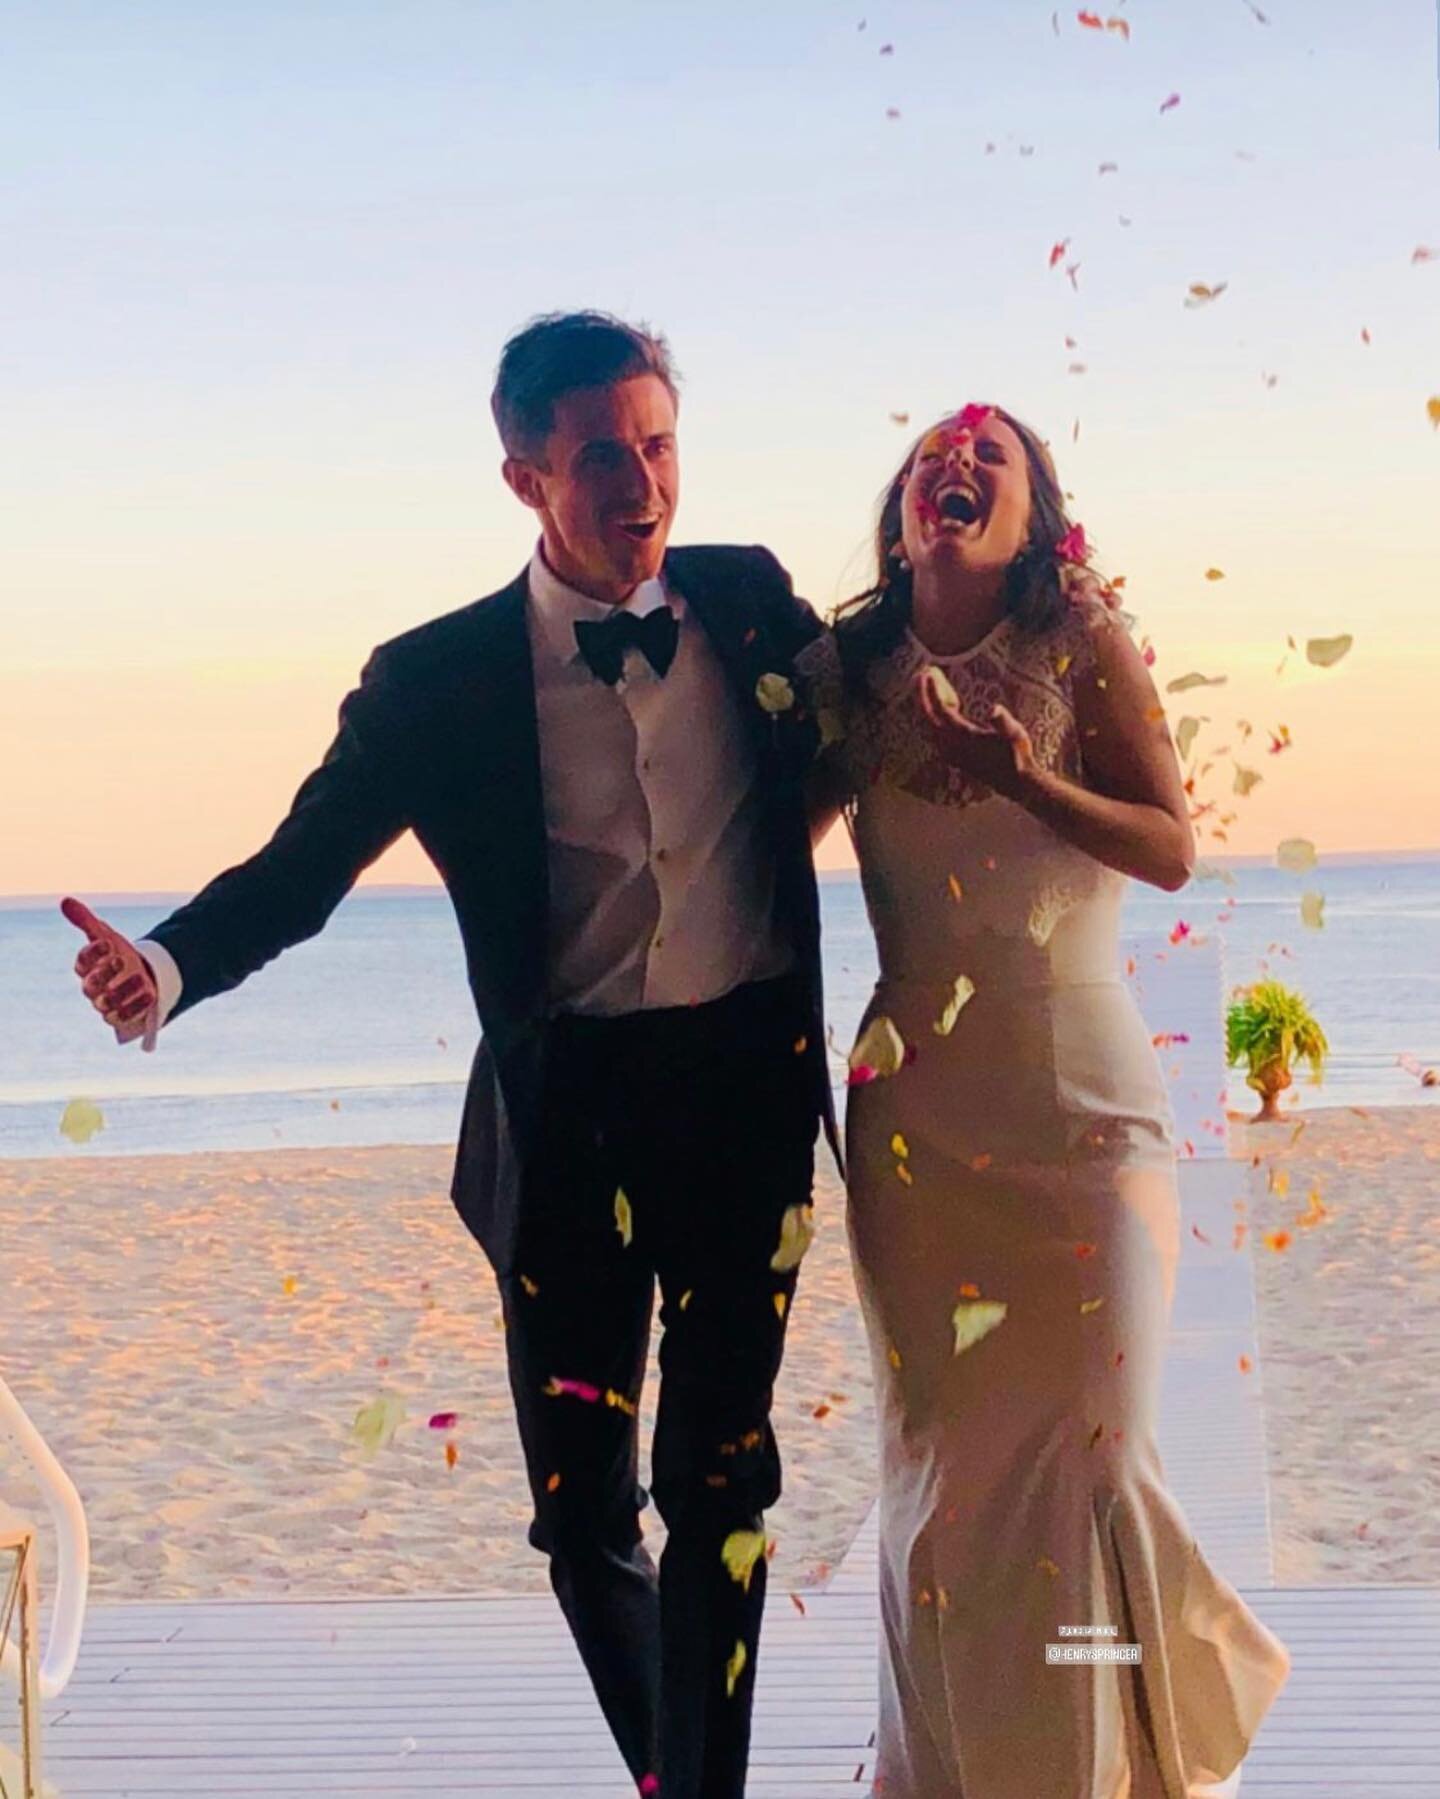 I think I&rsquo;ll start a new tradition: tossing flower petals at the bride and groom as they enter their reception and do their first dance. This amazing shot was taken by the bride&rsquo;s sister and captures the joy on the faces of this great cou